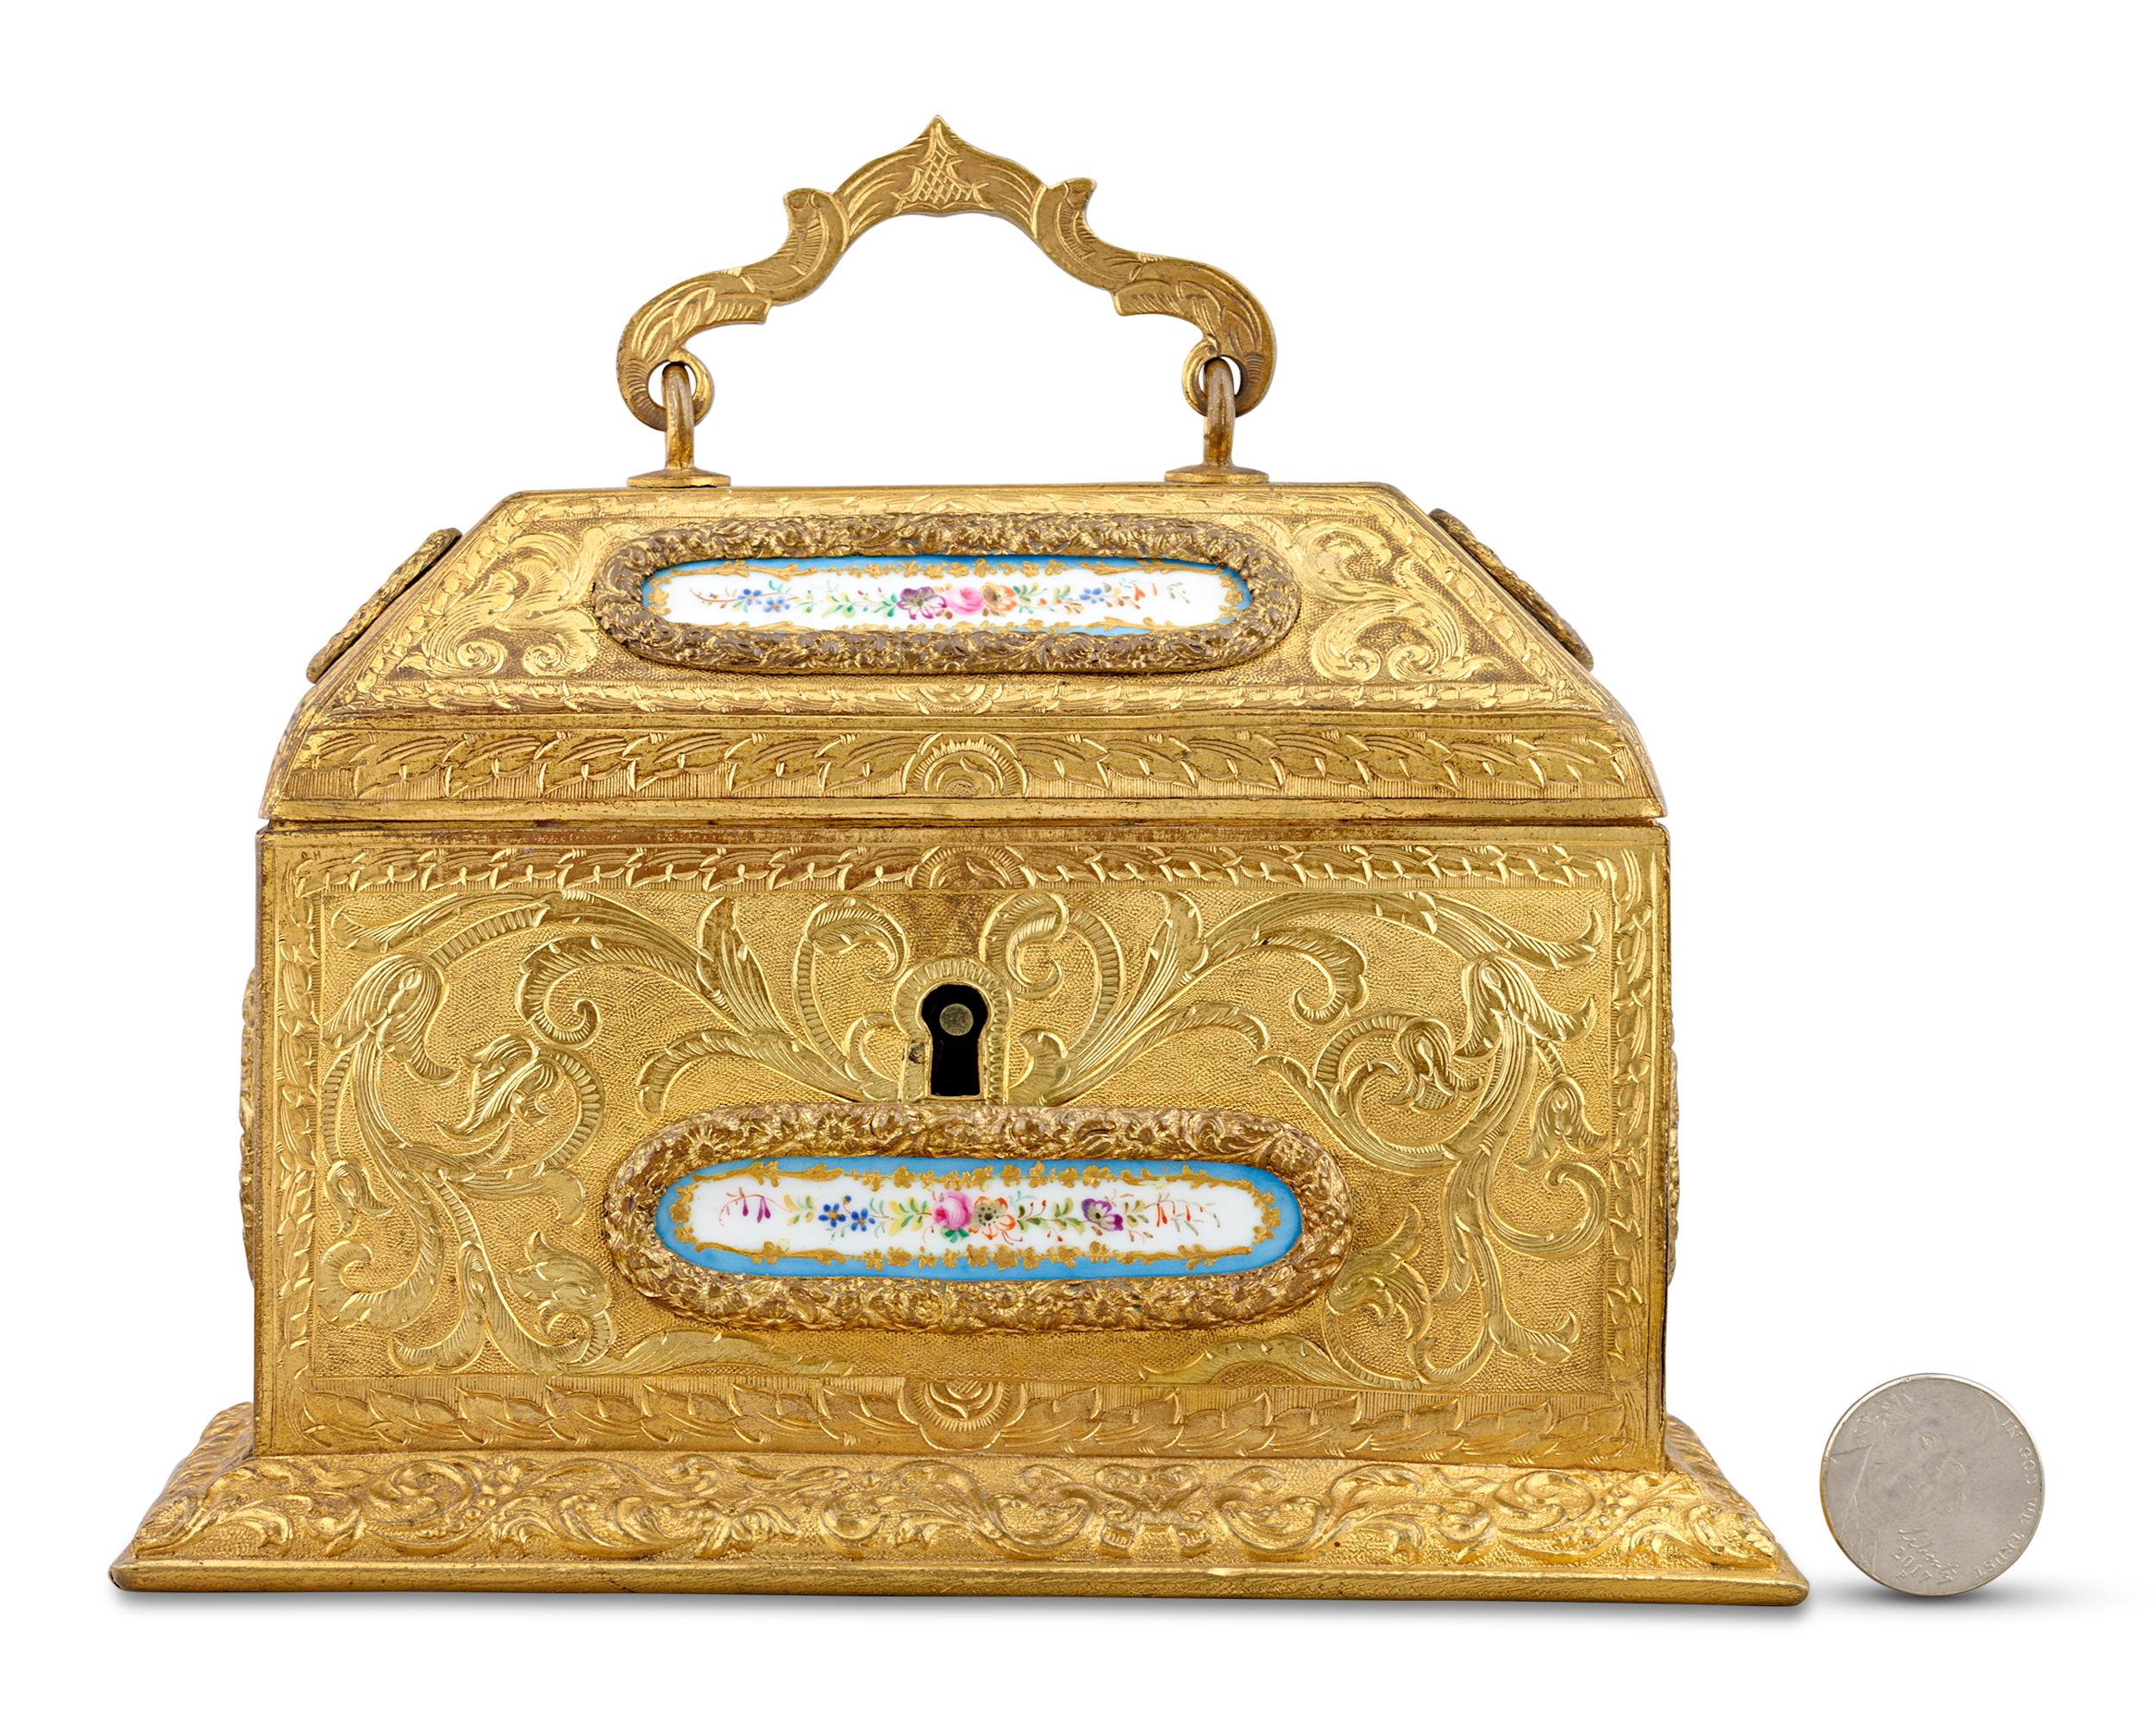 Sèvres Porcelain And Bronze Box In Excellent Condition For Sale In New Orleans, LA